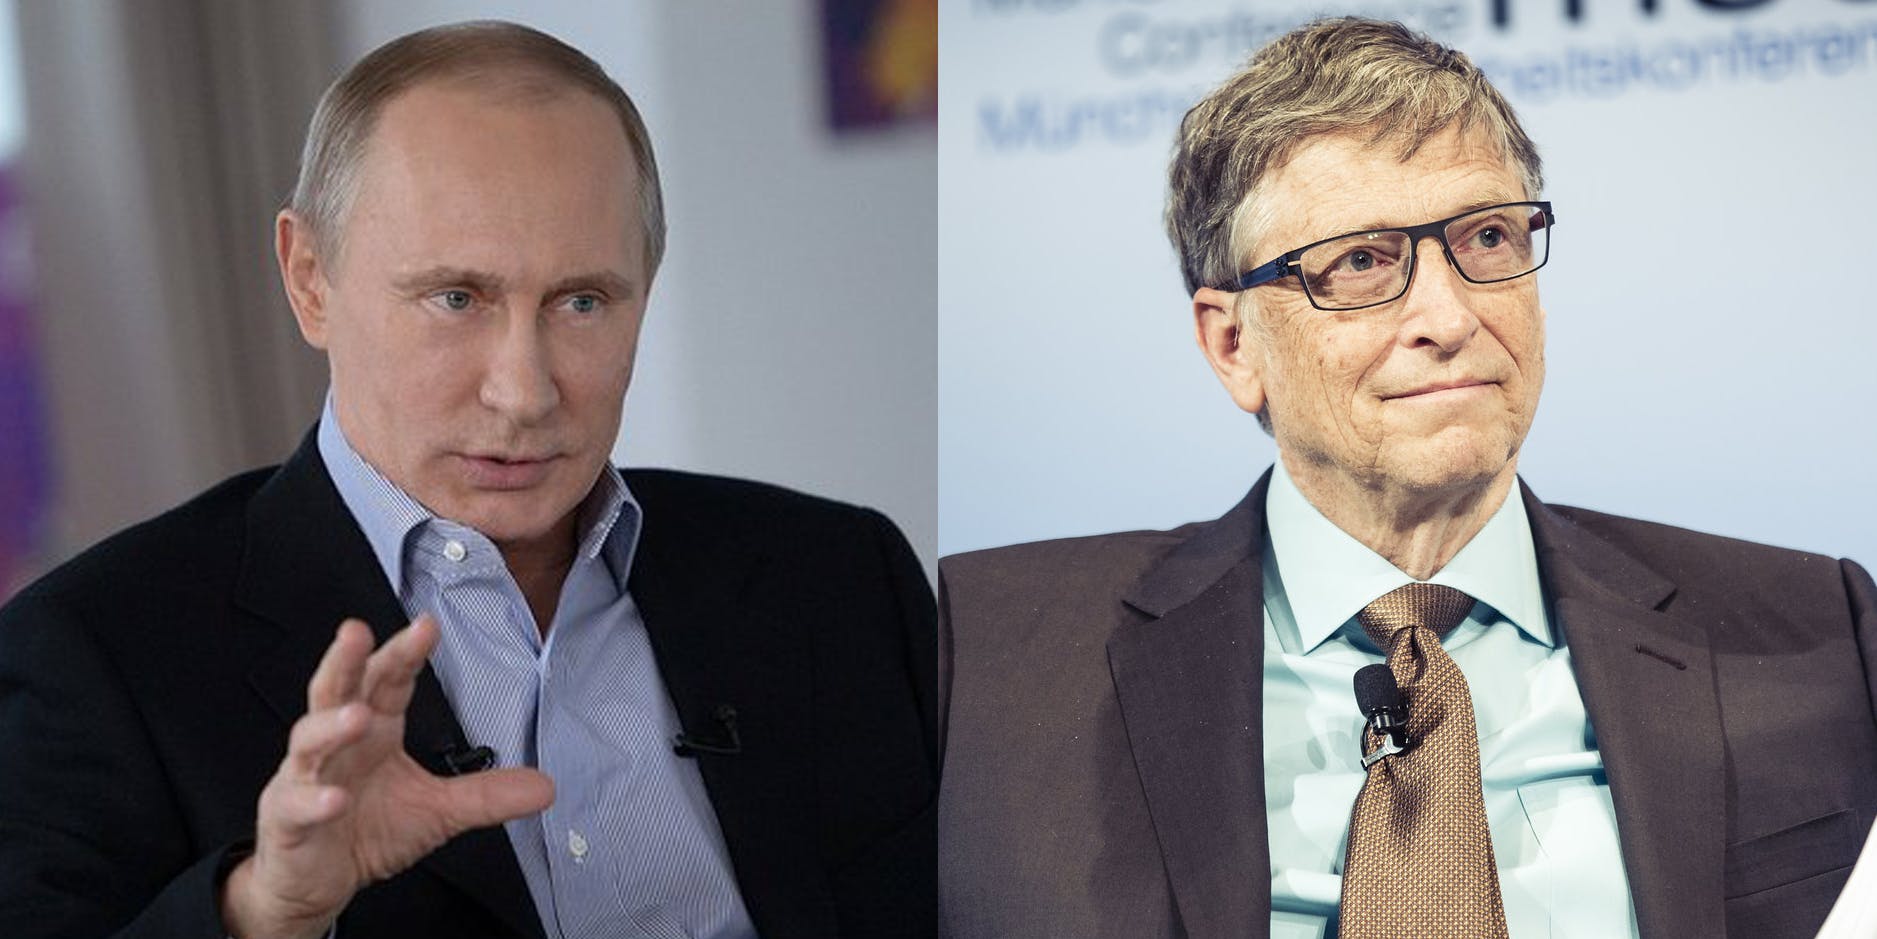 A side by side of Vladimir Putin and Bill Gates